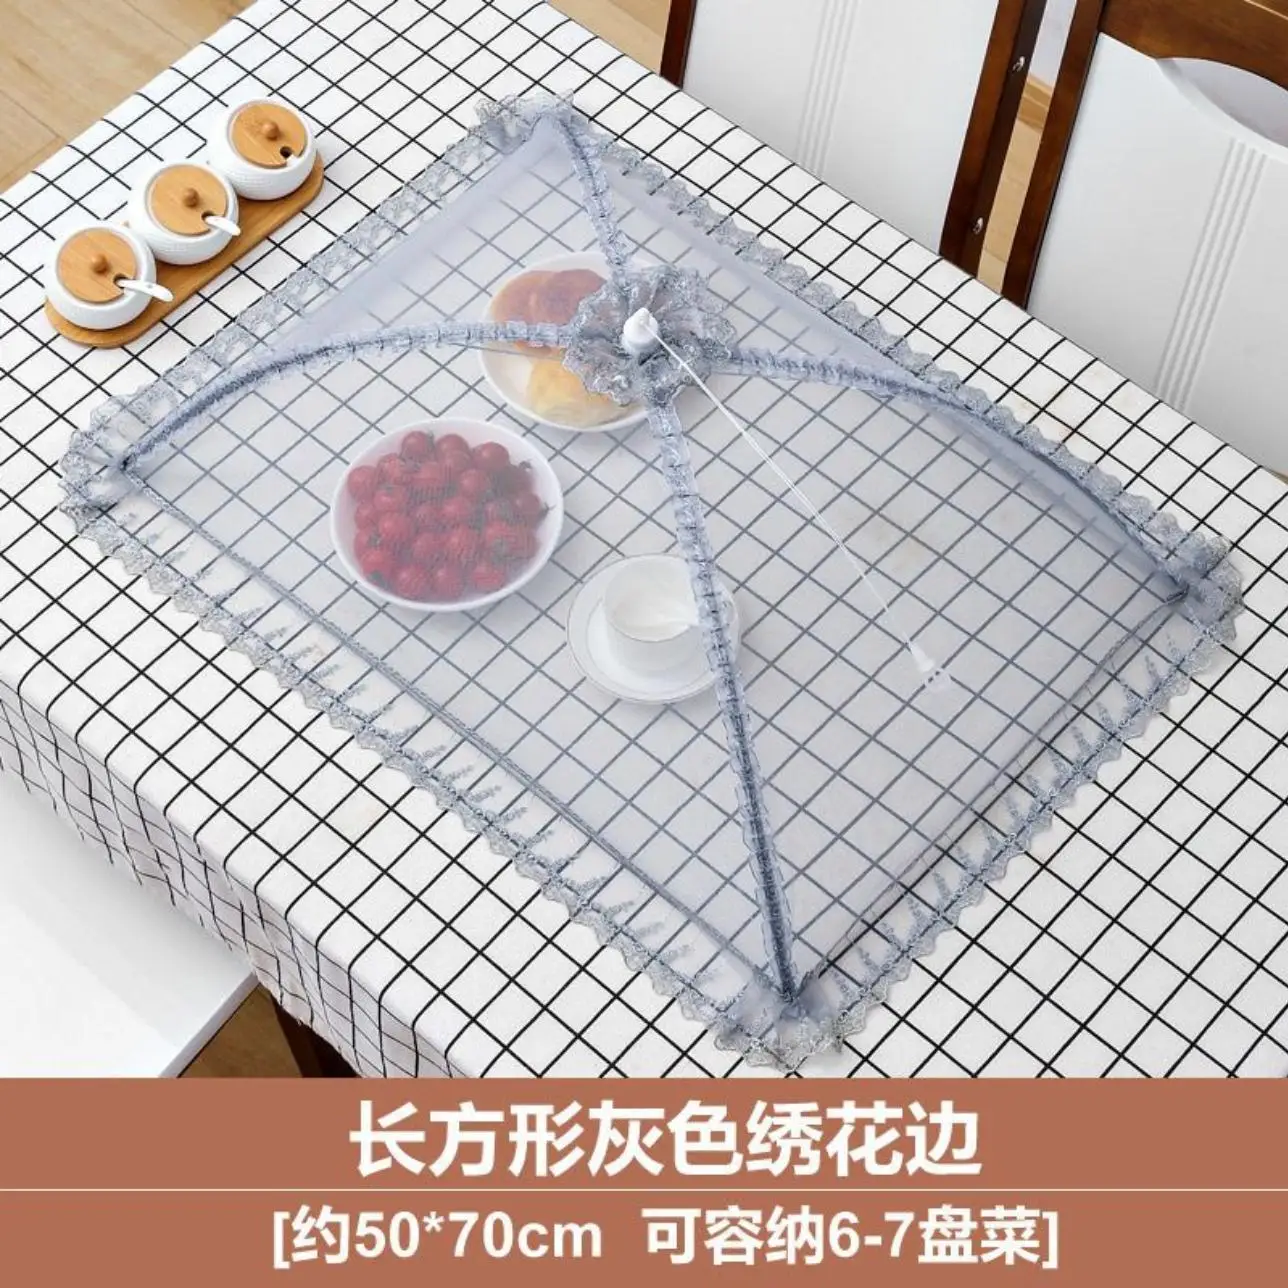 

Foldable Food Mesh Cover Fly Anti Mosquito Pop-Up Food Cover Umbrella Meal Vegetable Fruit Breathable Cover Kitchen Accessories